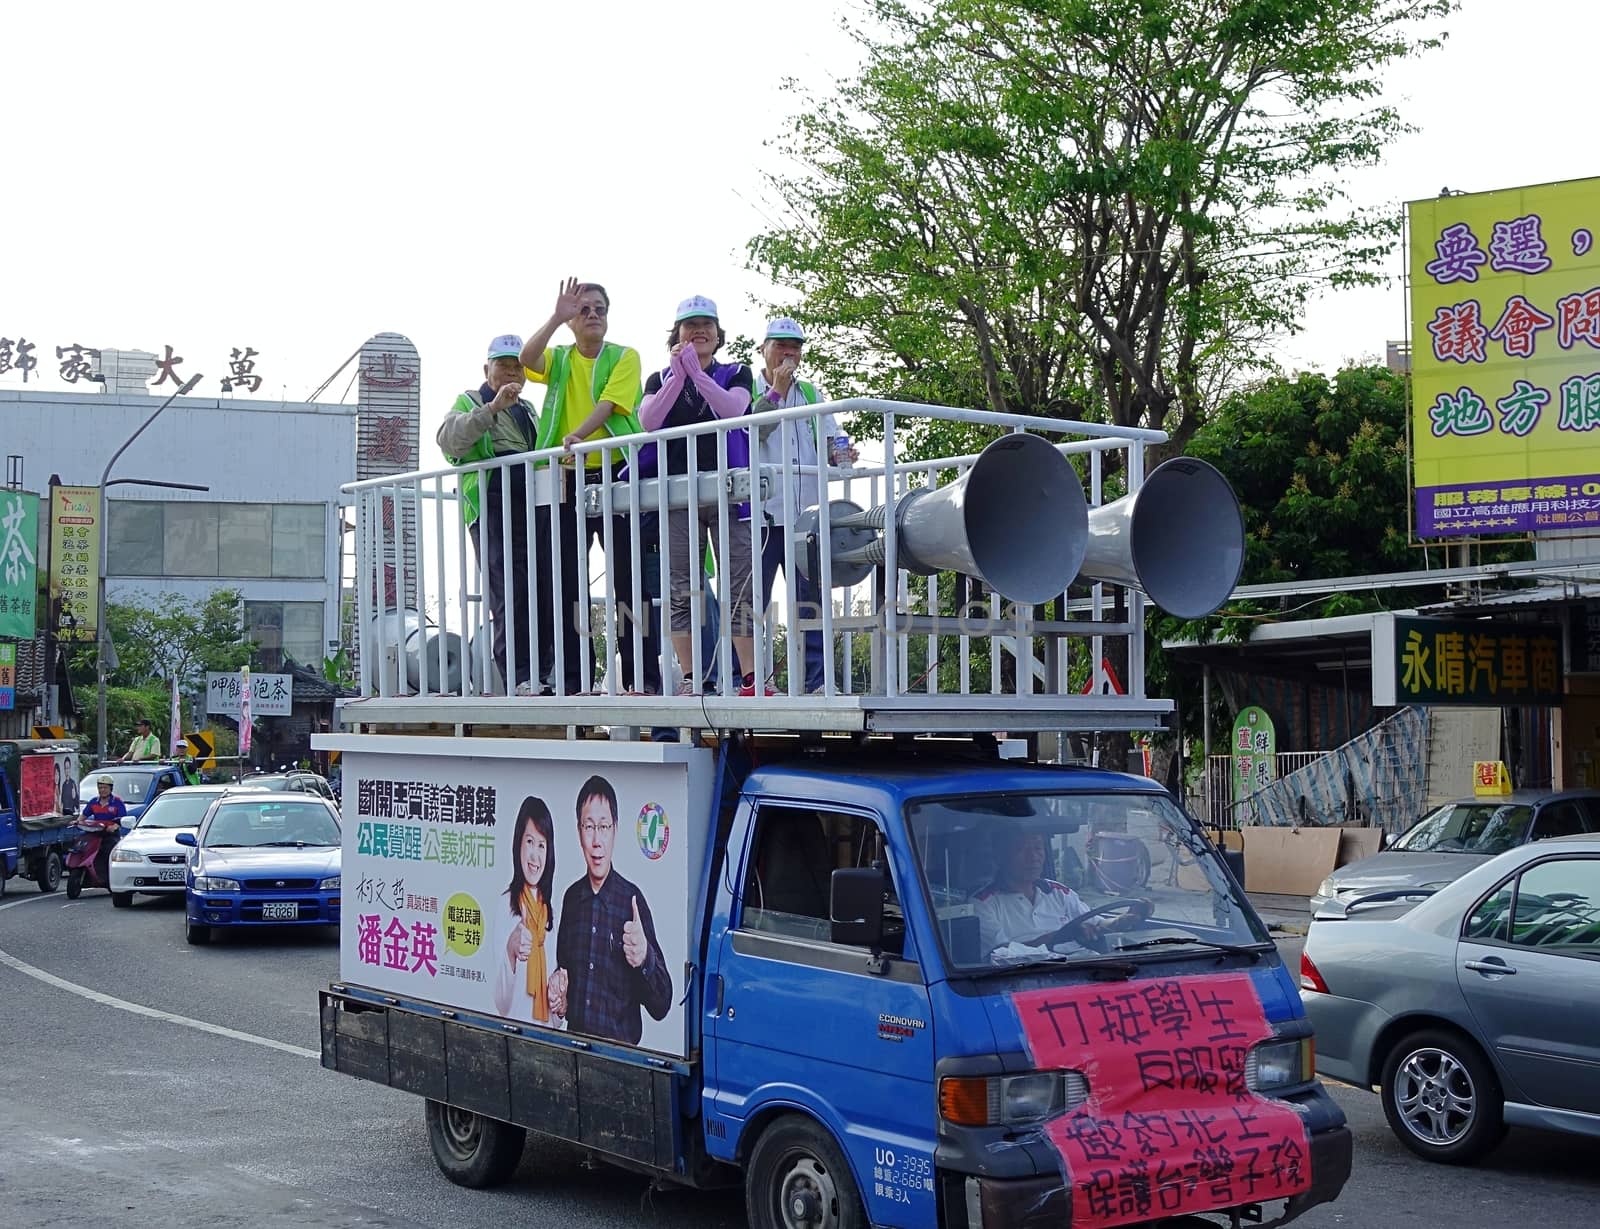 KAOHSIUNG, TAIWAN -- MARCH 29, 2014: City council candidate Pan Jing Ying campaigns in the run up for the 2014 local elections.